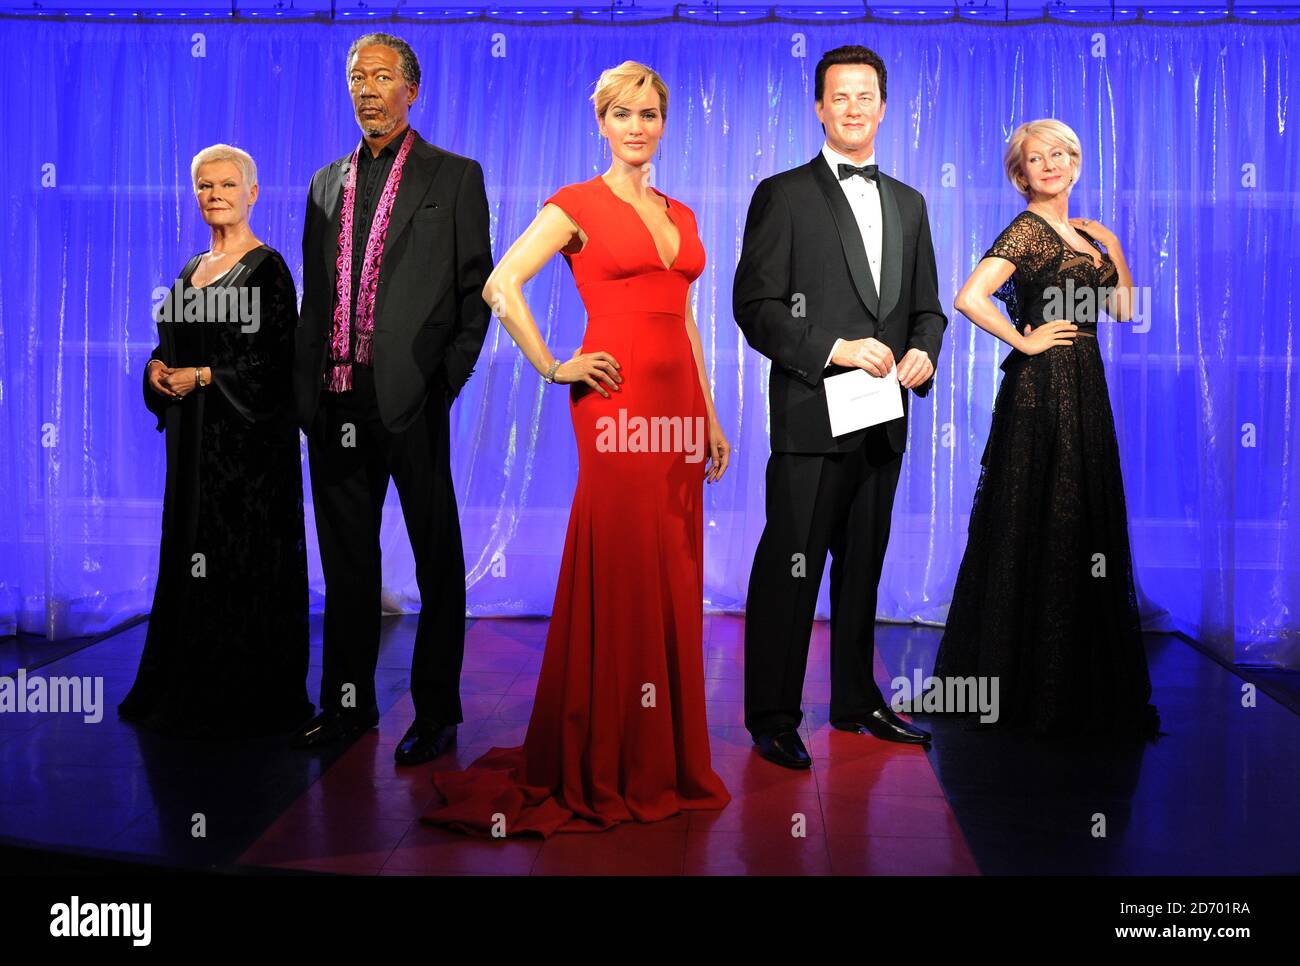 Statues of award winners Judi Dench, Morgan Freeman, Kate Winslet, Tom Hanks and Dame Helen Mirren at the opening of the Awards Season Party at Madame Tussauds in London. Stock Photo